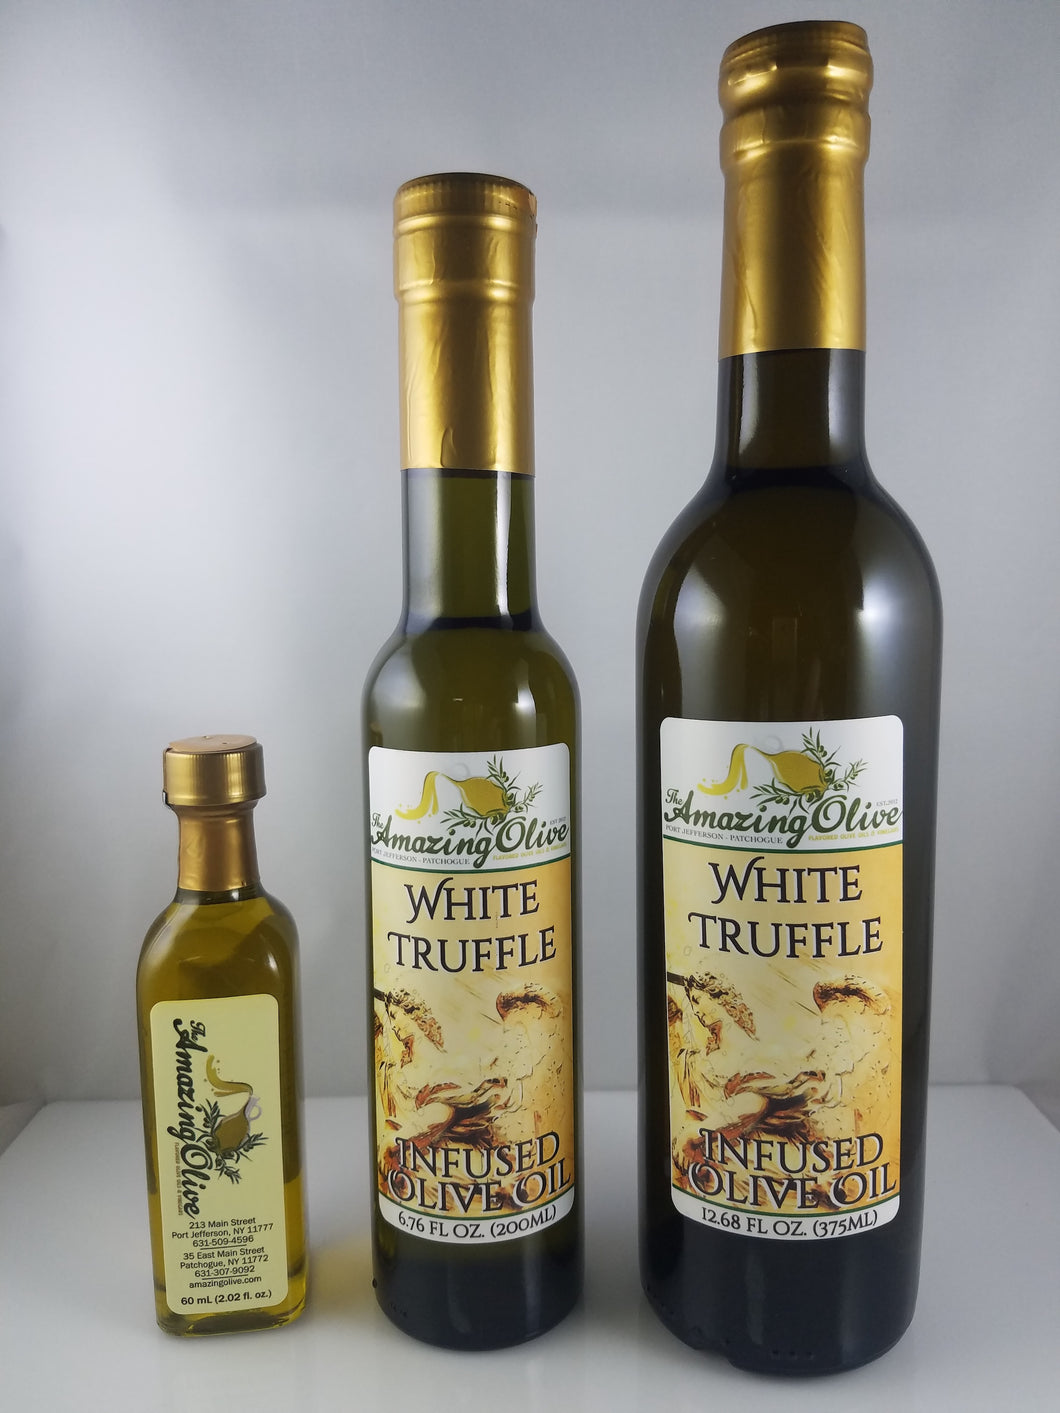 White Truffle Infused Olive Oil